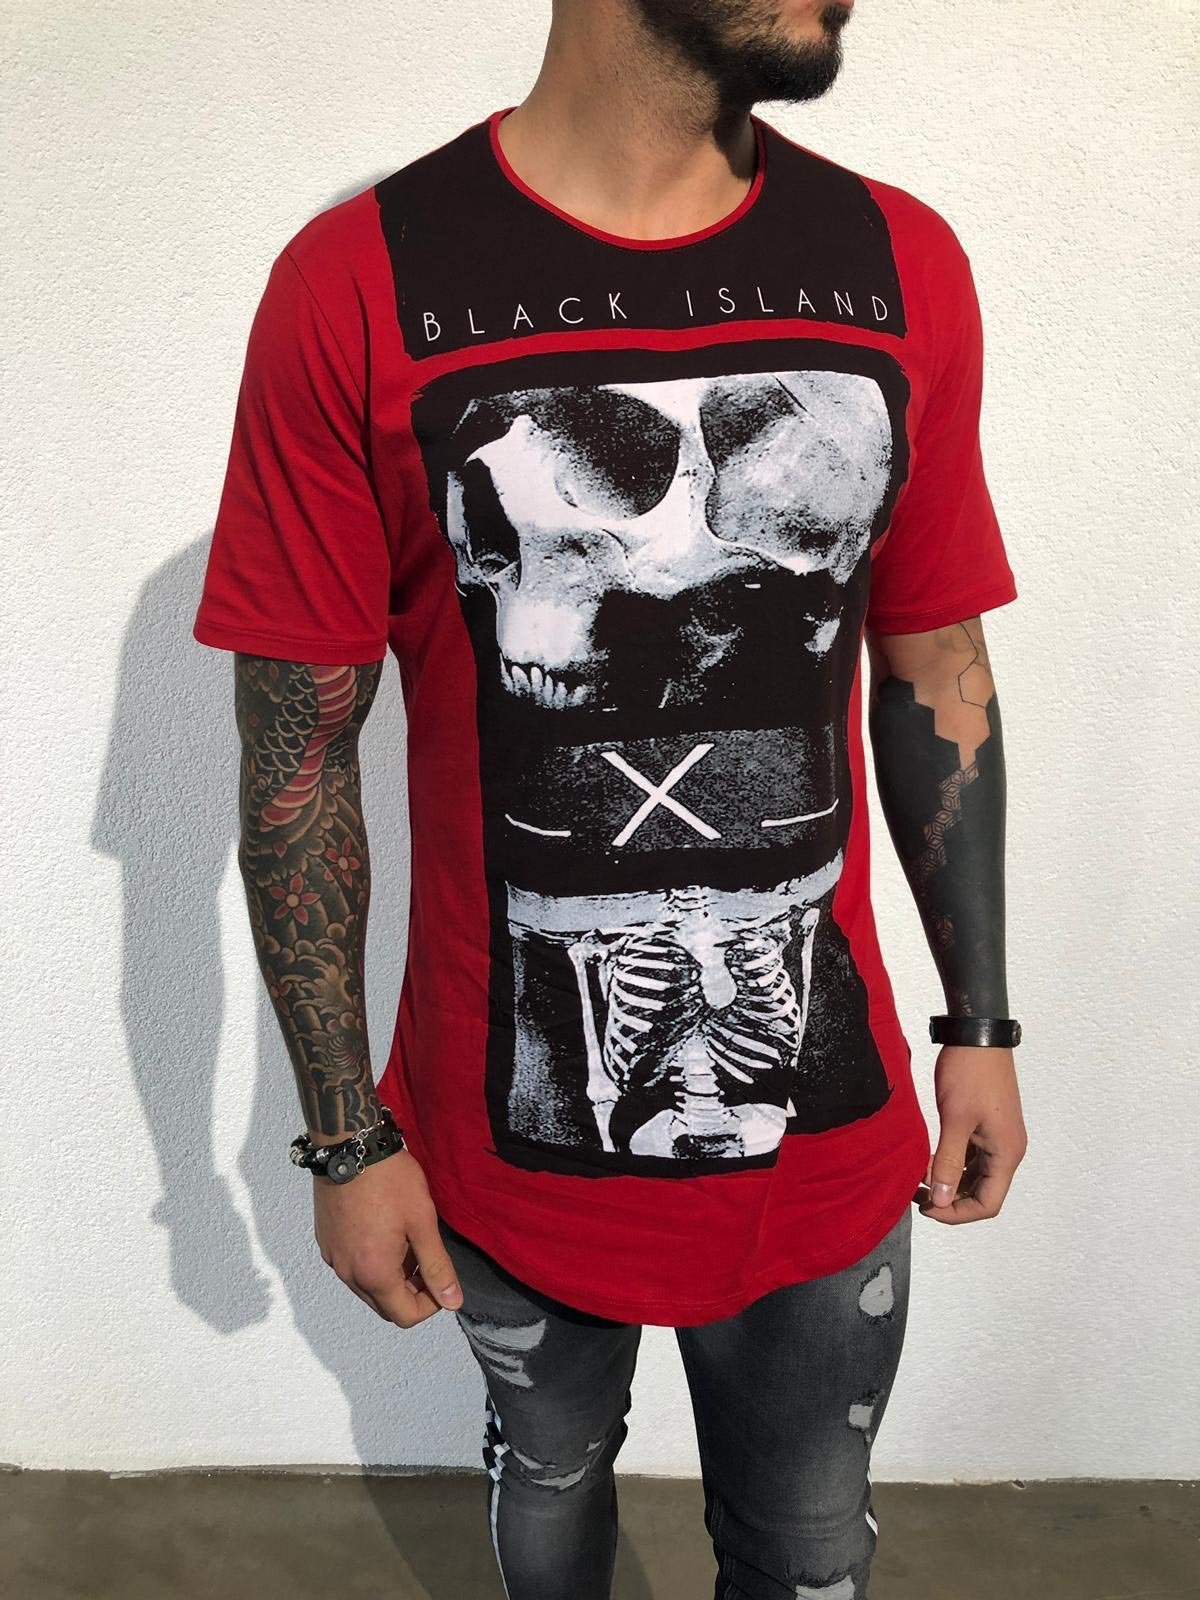 tandpine Engager Lang Red Oversize Printed T-Shirt BL134 Streetwear T-Shirts | Sneakerjeans